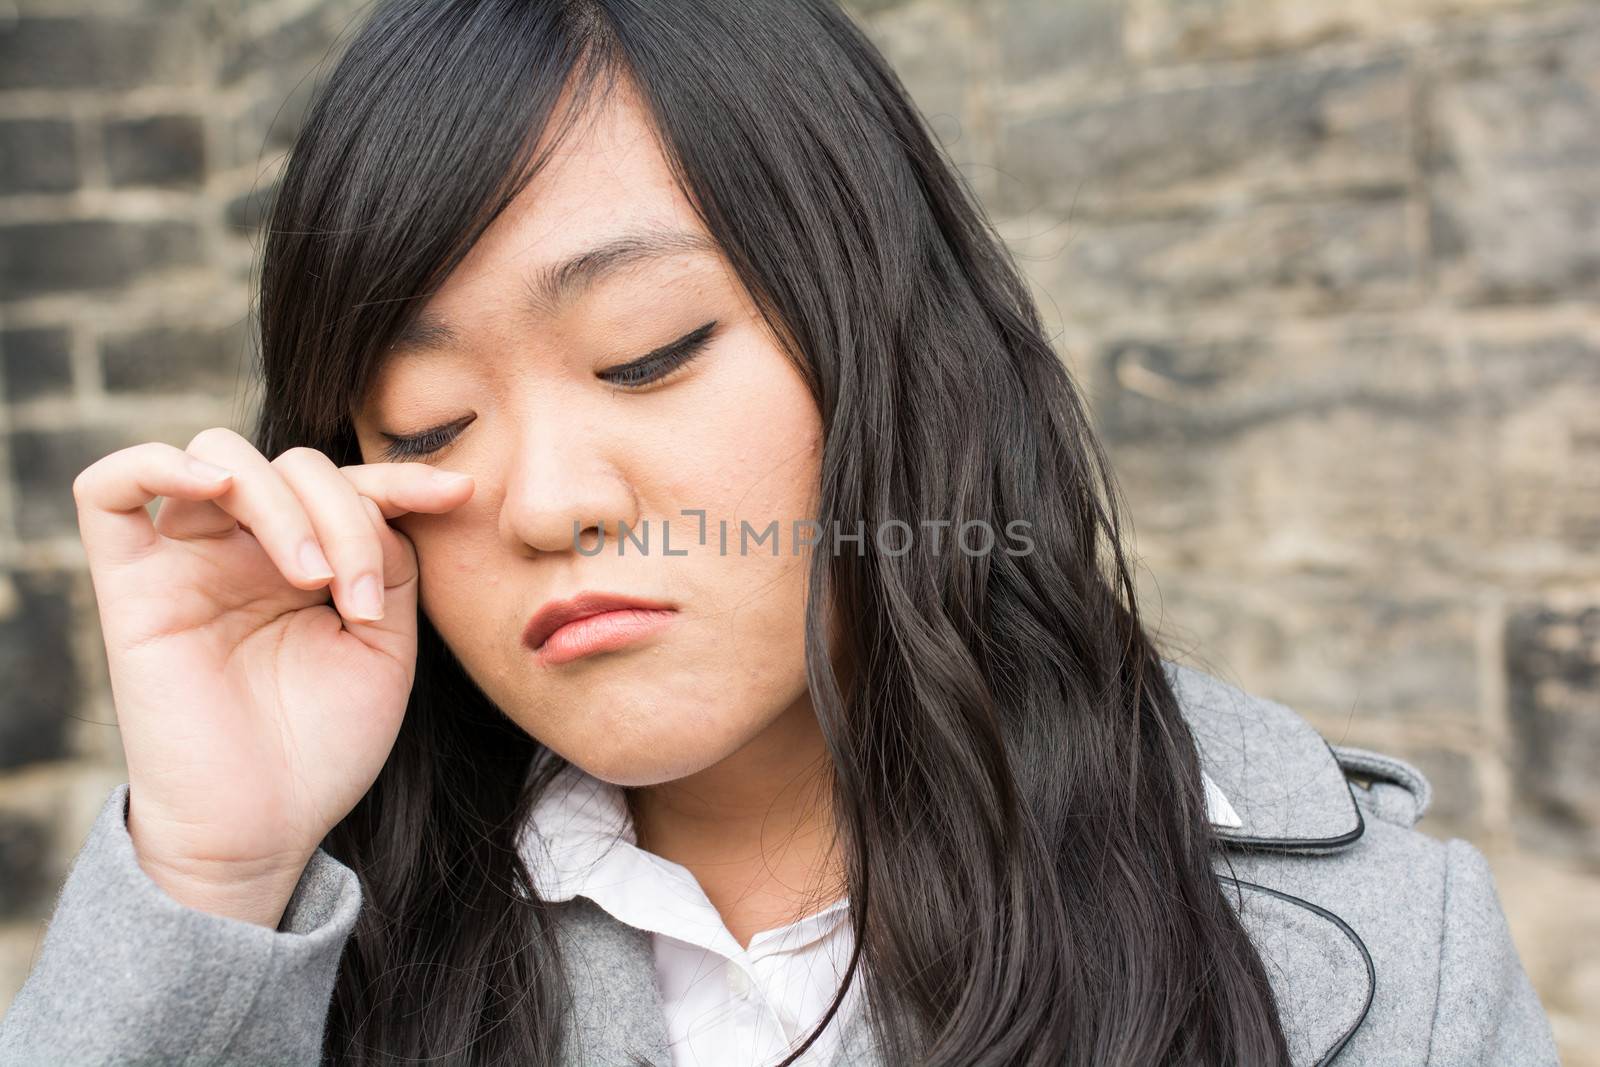 Portrait of young girl in front of a stone wall looking upset and wiping tears